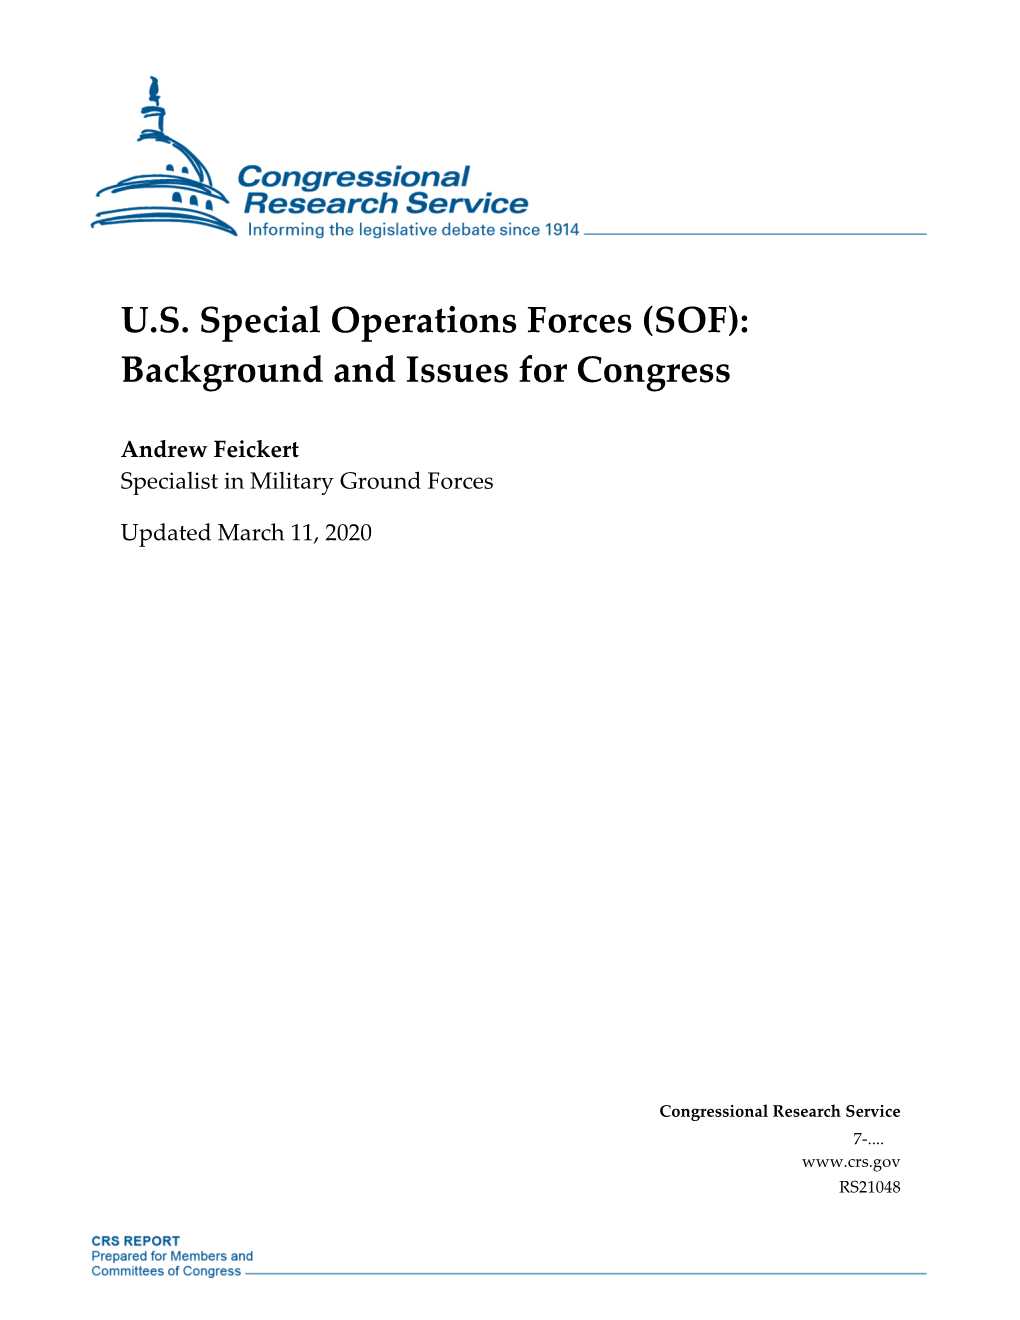 US Special Operations Forces (SOF)